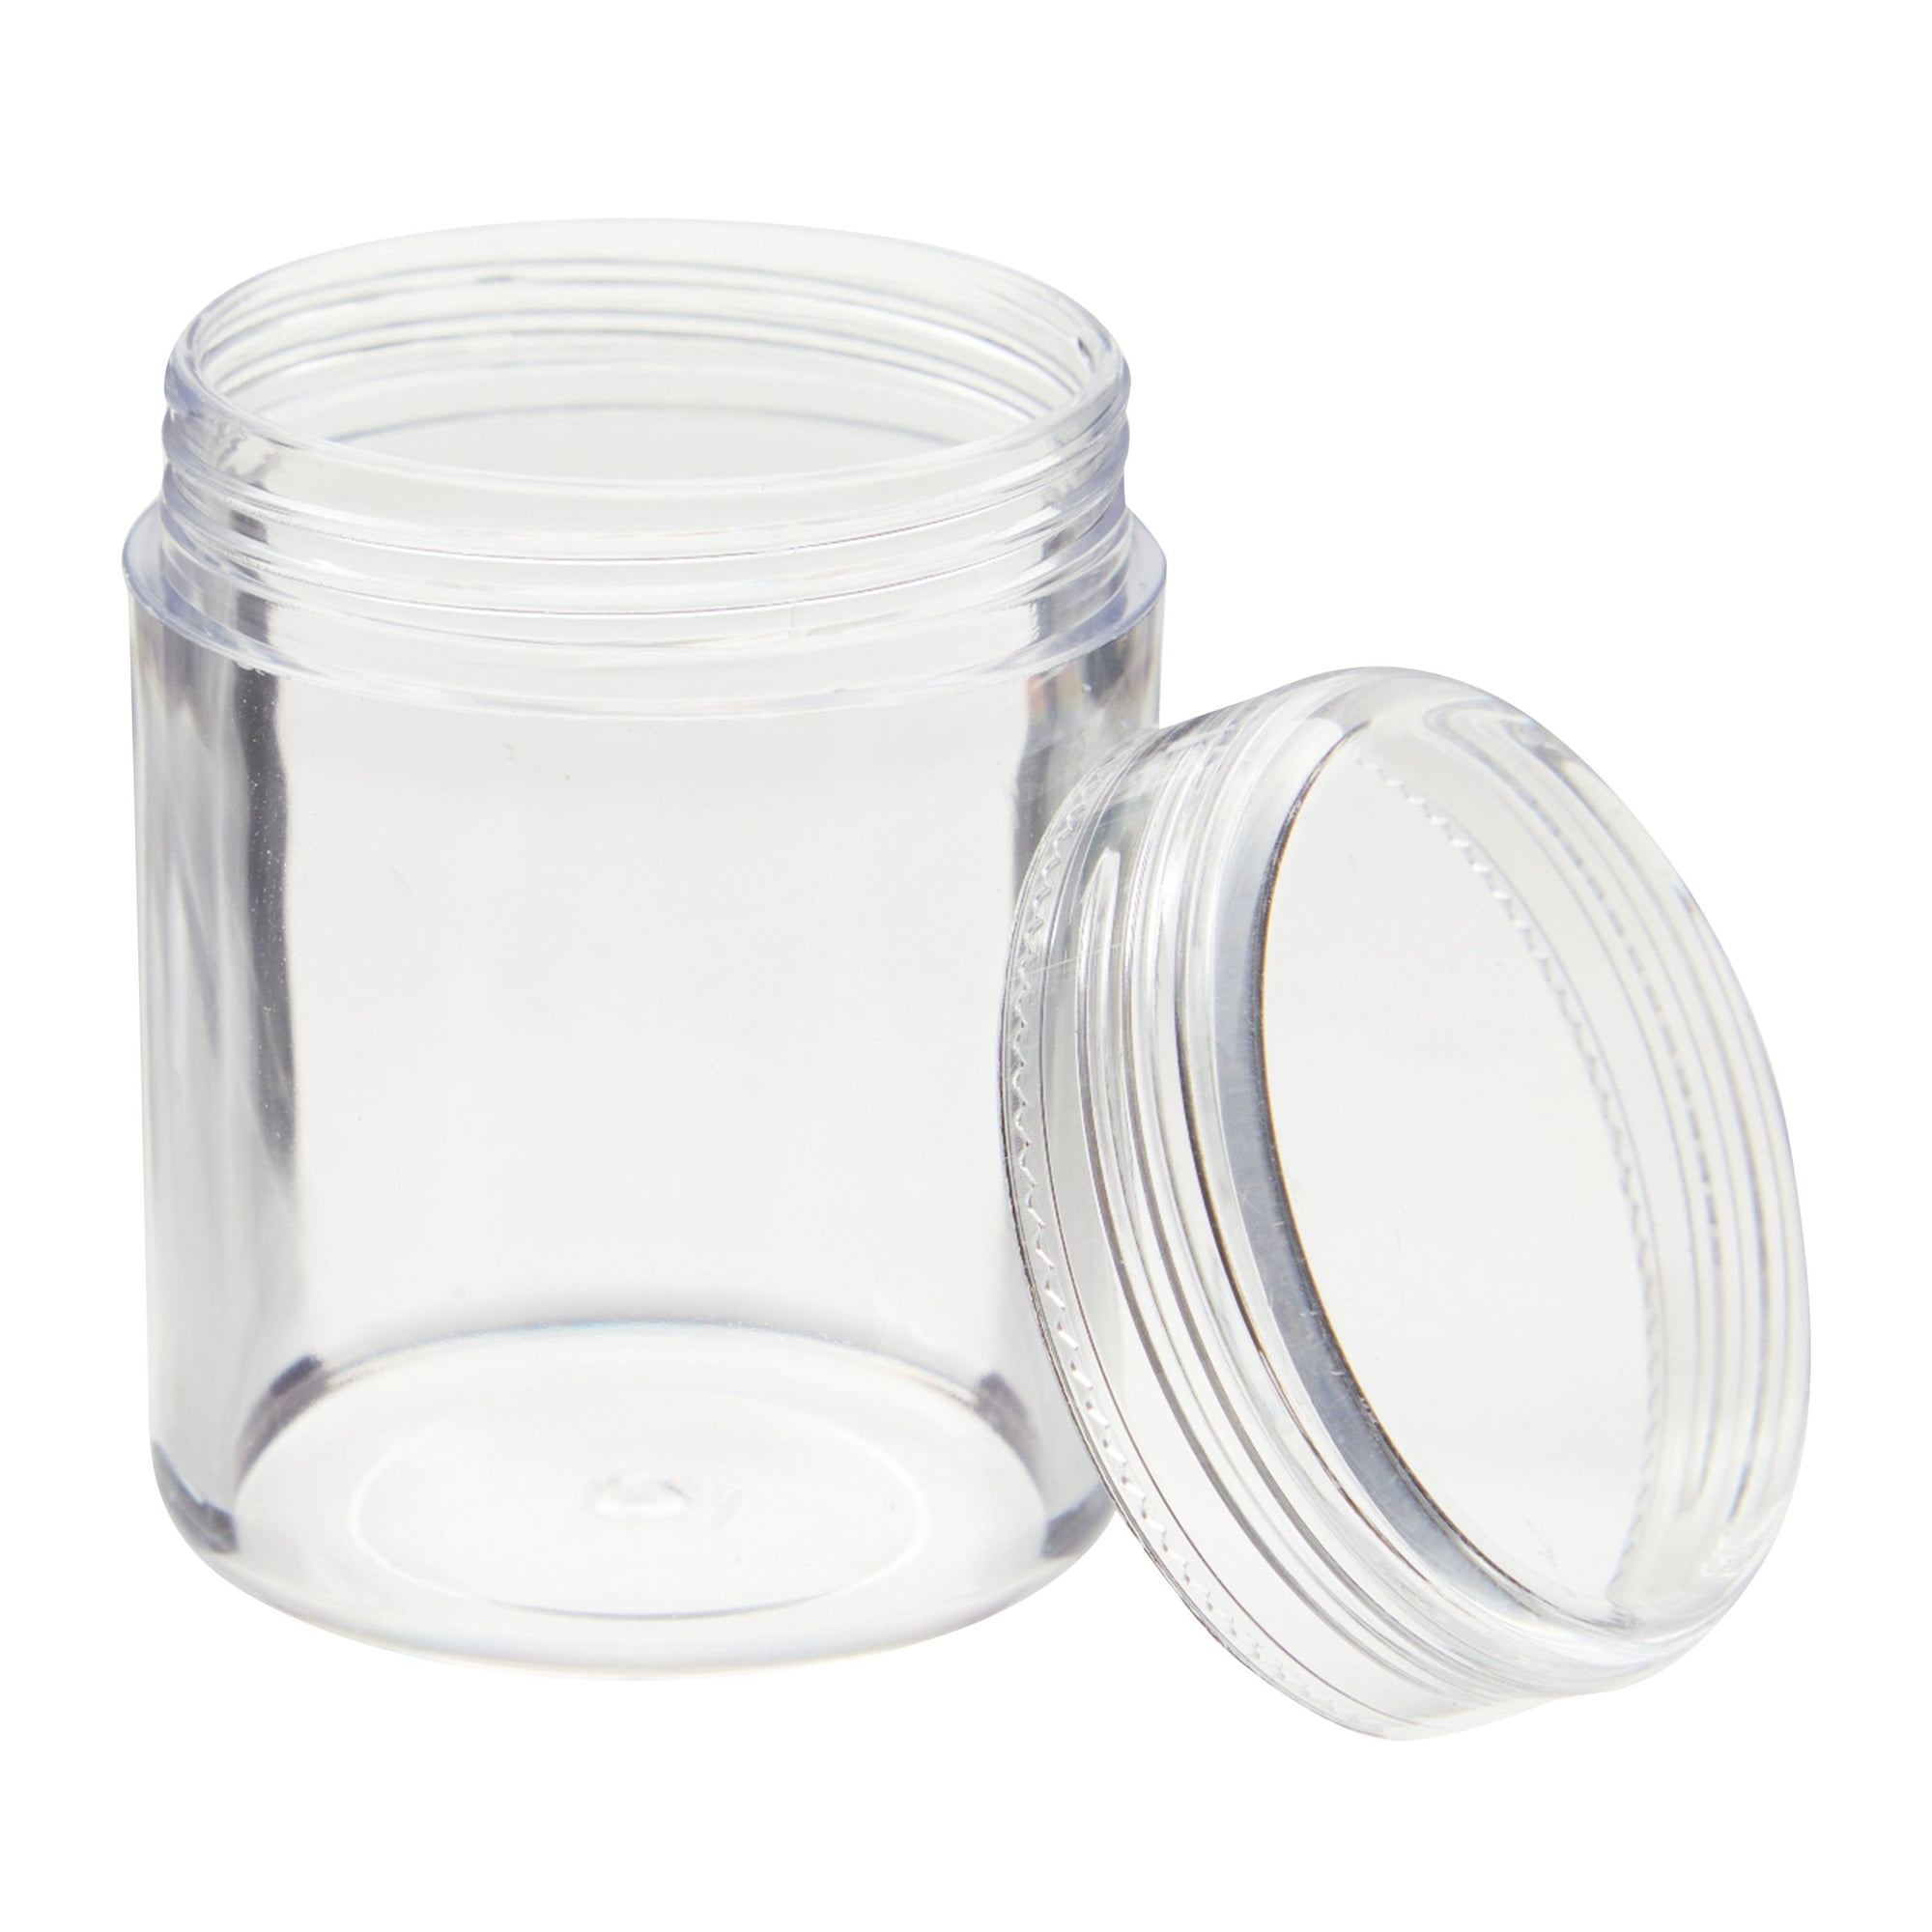 PS Transparent Small Plastic Containers Pack For Cervacoria Mask